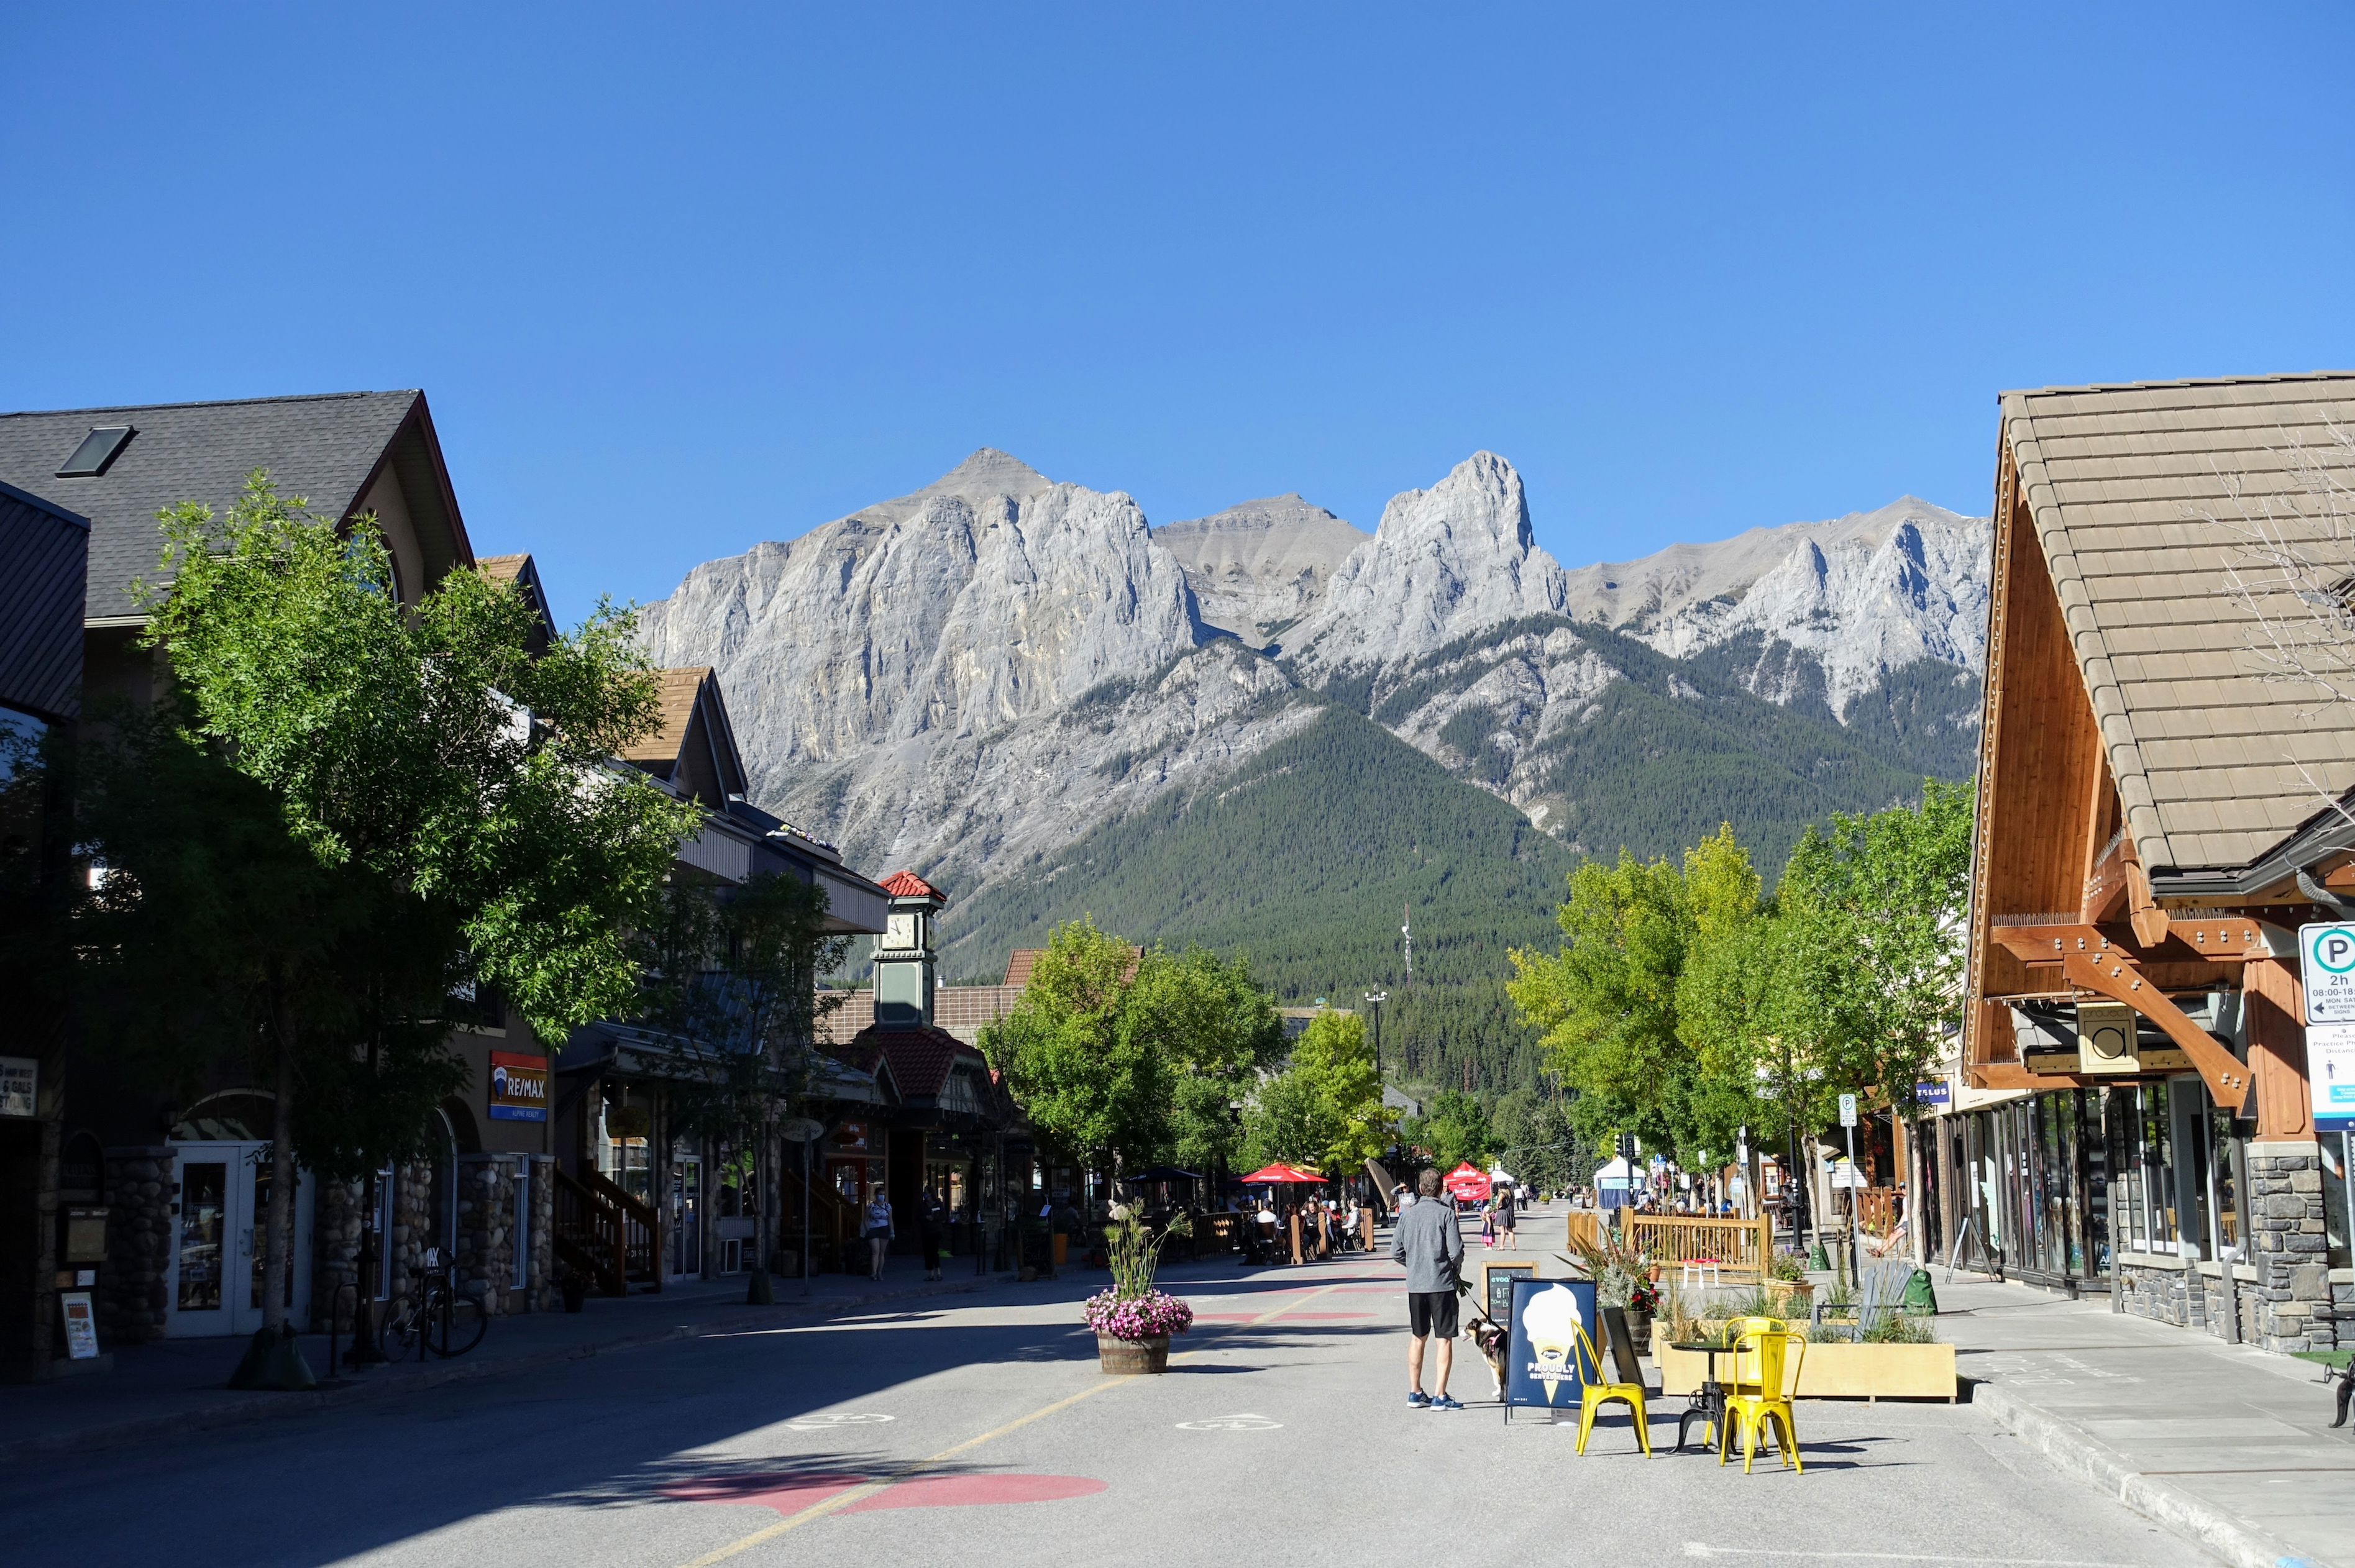 2. Canmore - Best for Families - A view of the main street with the mountains in the background during a beautiful summer day in Canmore, Alberta, Canada.